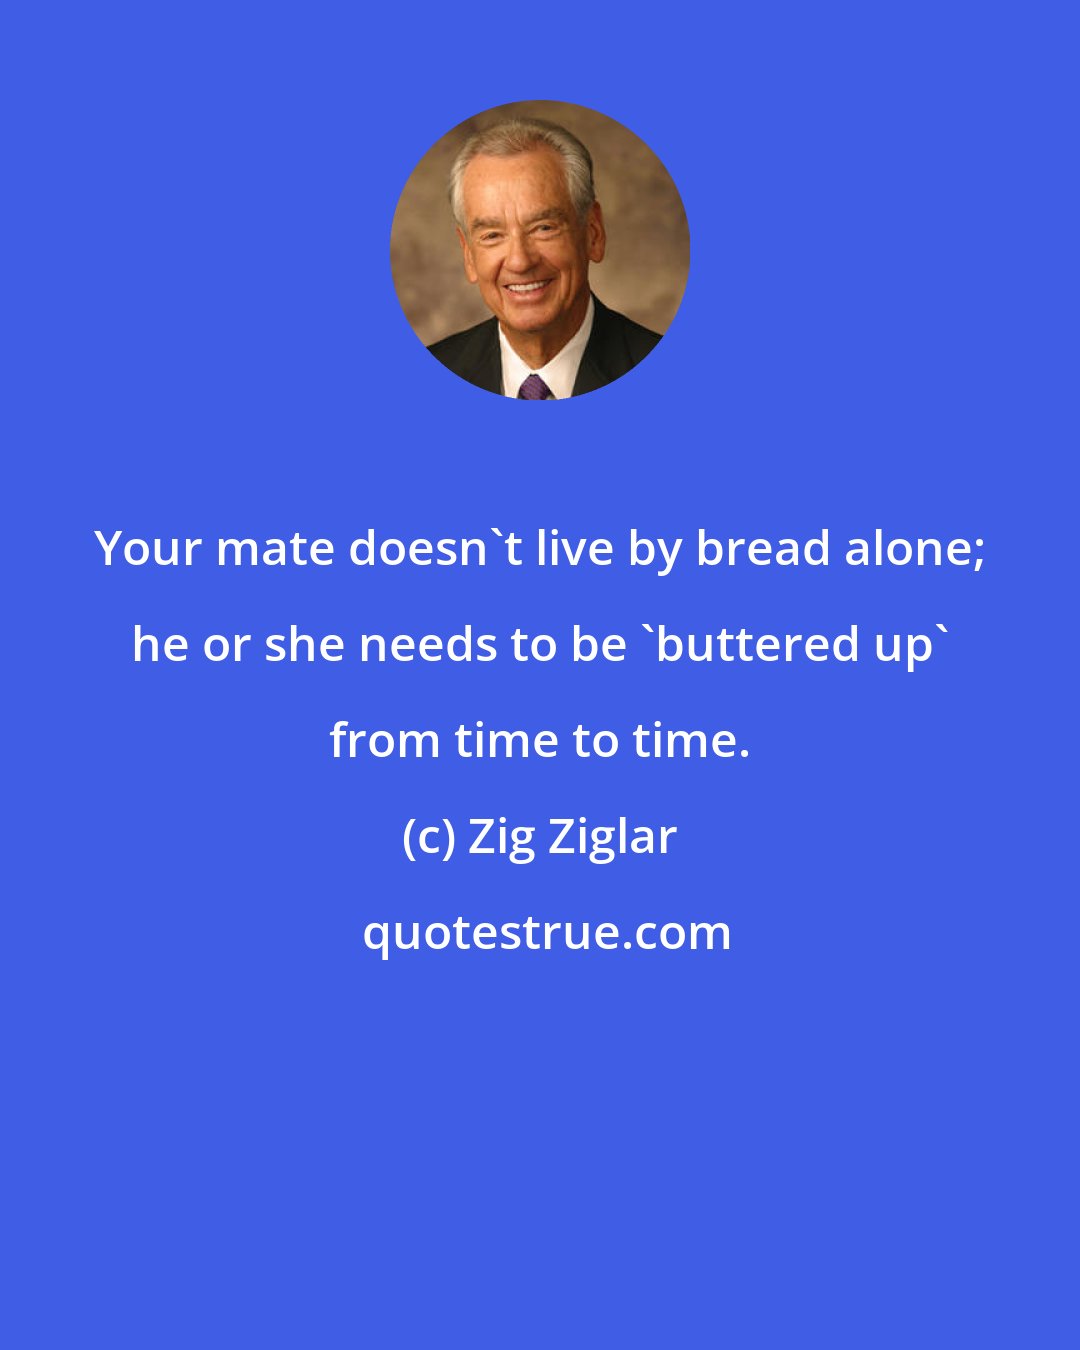 Zig Ziglar: Your mate doesn't live by bread alone; he or she needs to be 'buttered up' from time to time.